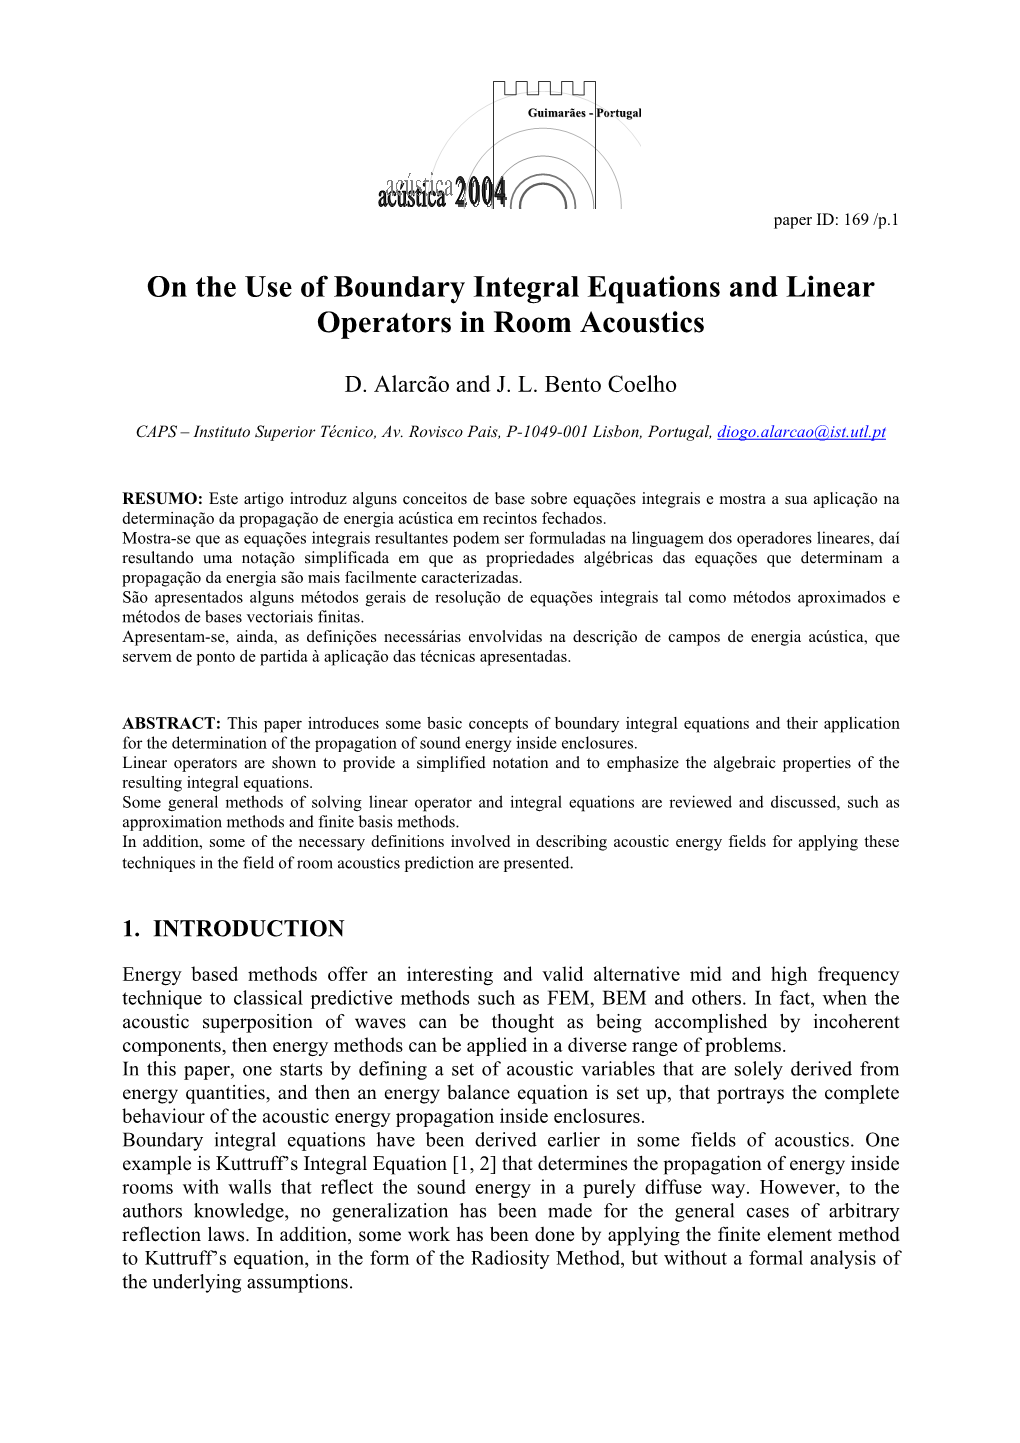 On the Use of Boundary Integral Equations and Linear Operators in Room Acoustics